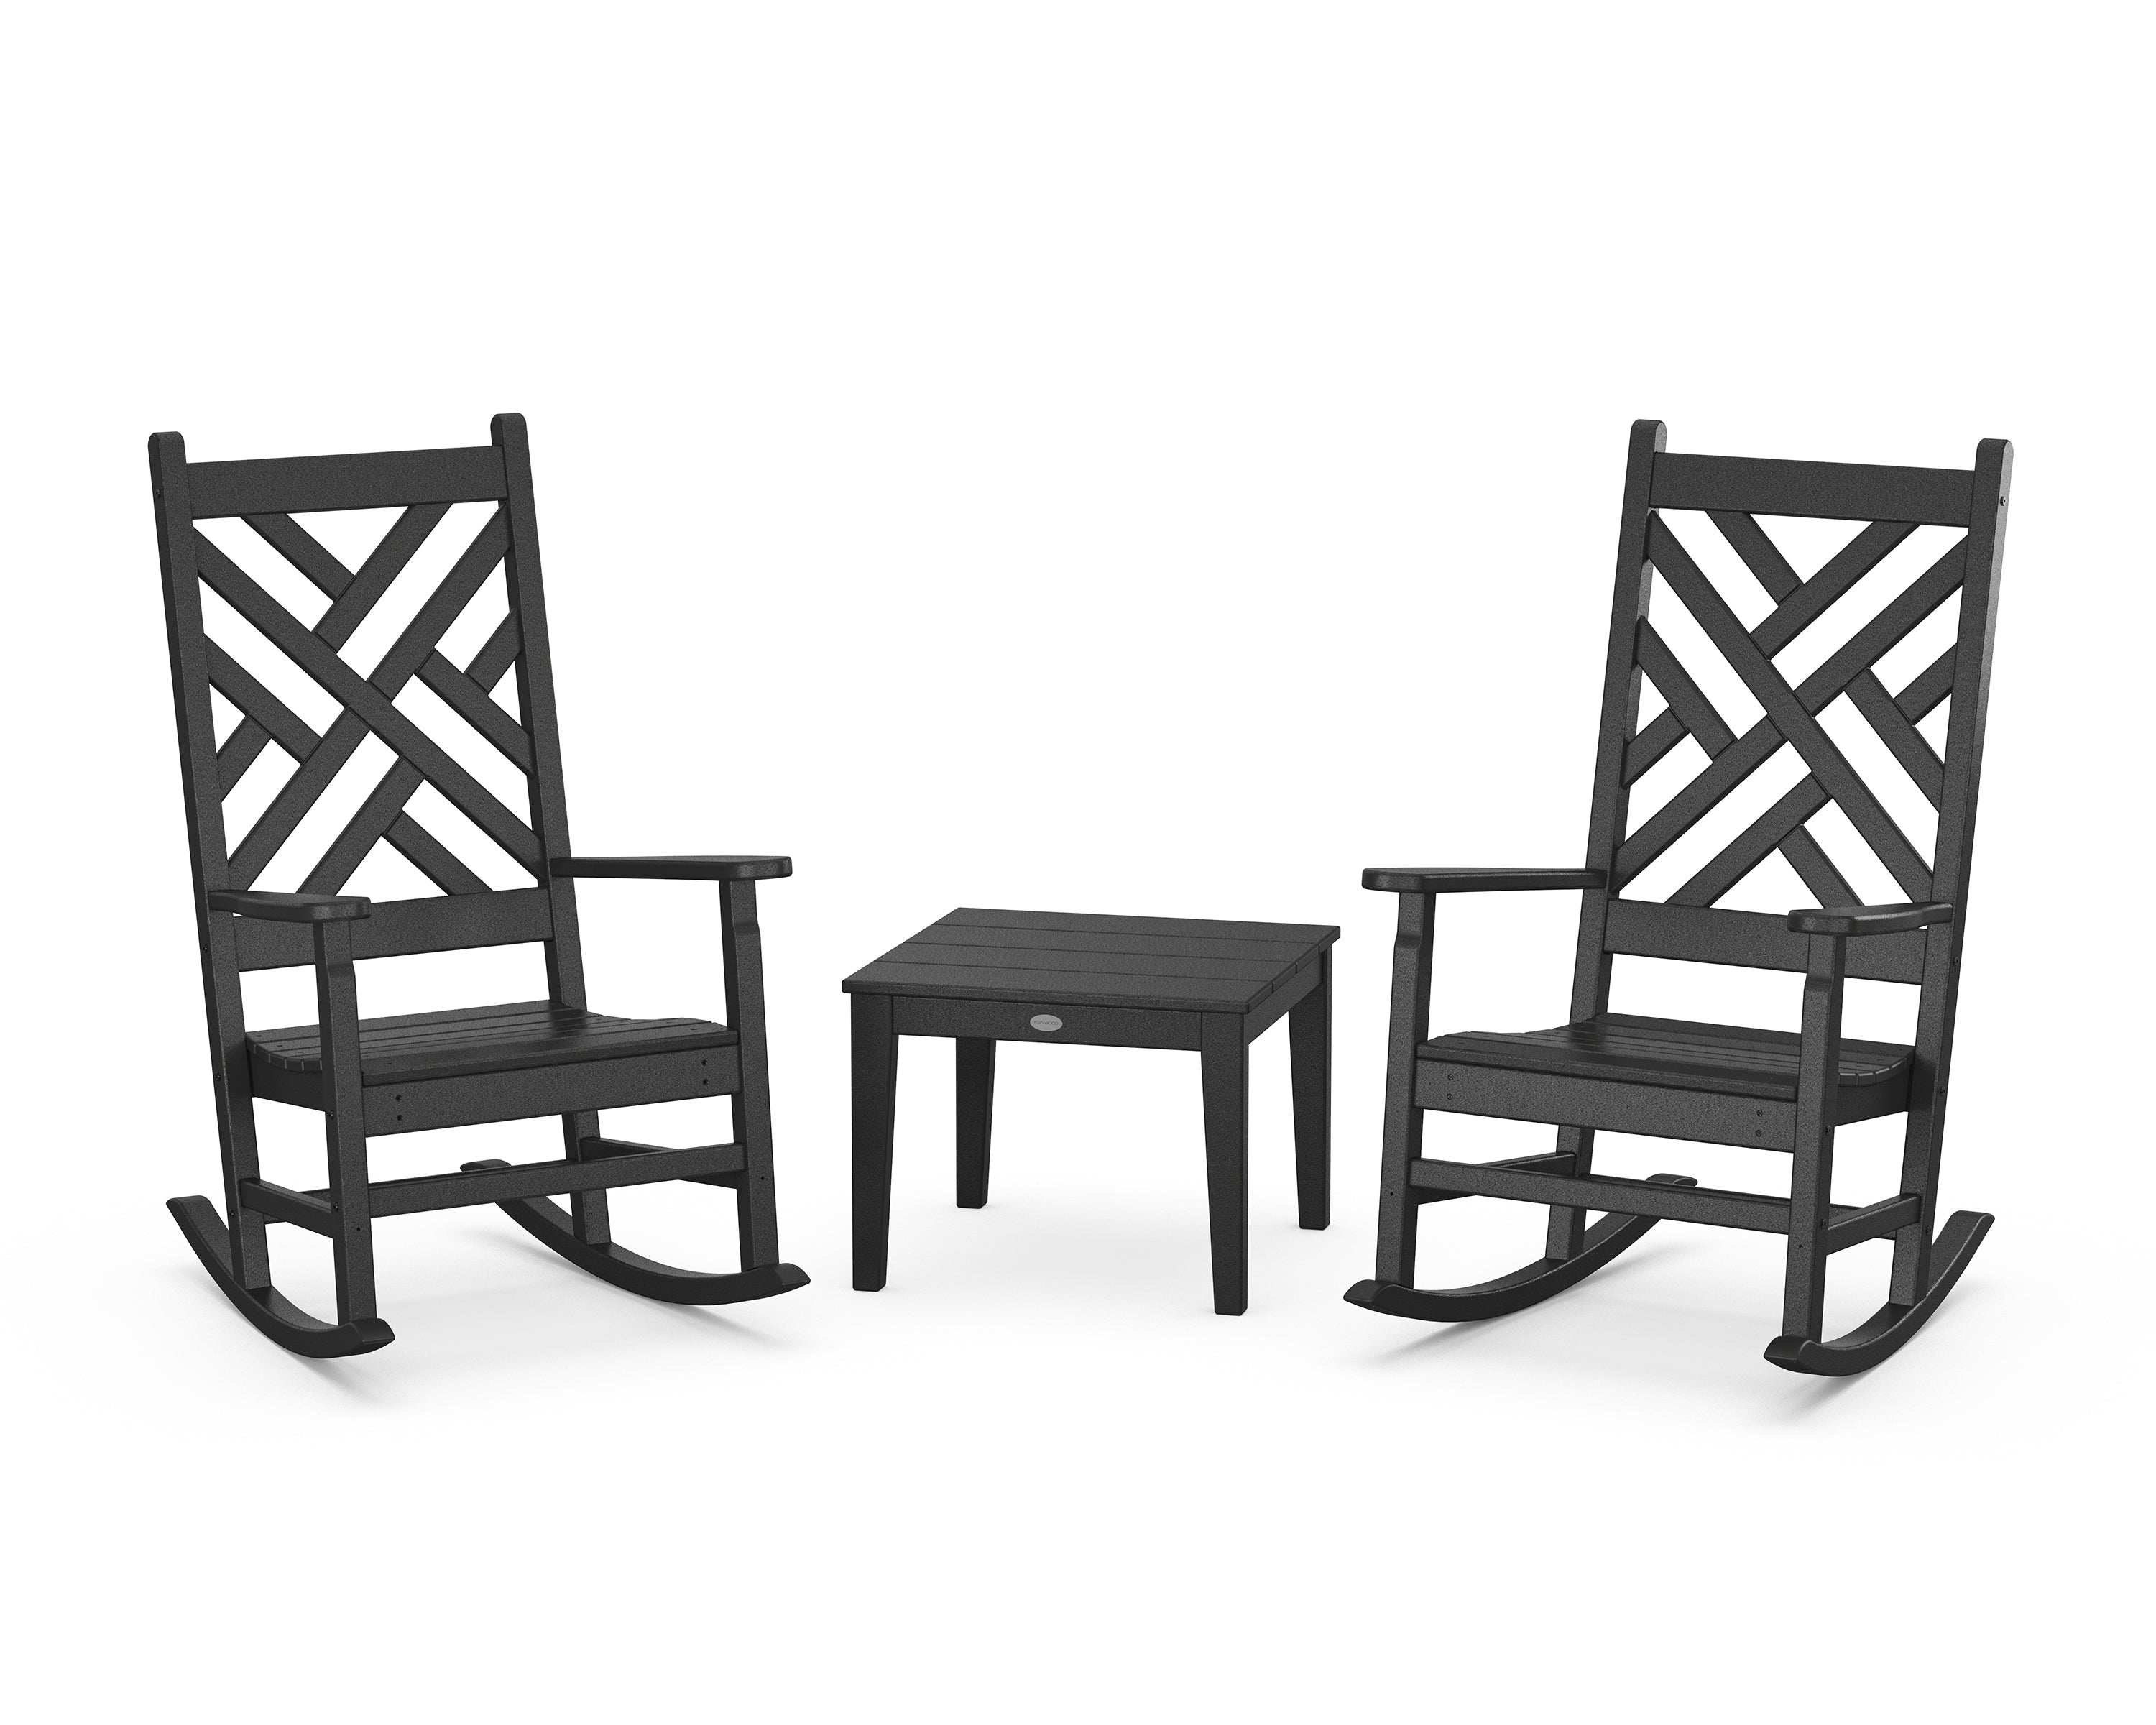 POLYWOOD® Chippendale 3-Piece Rocking Chair Set in Black